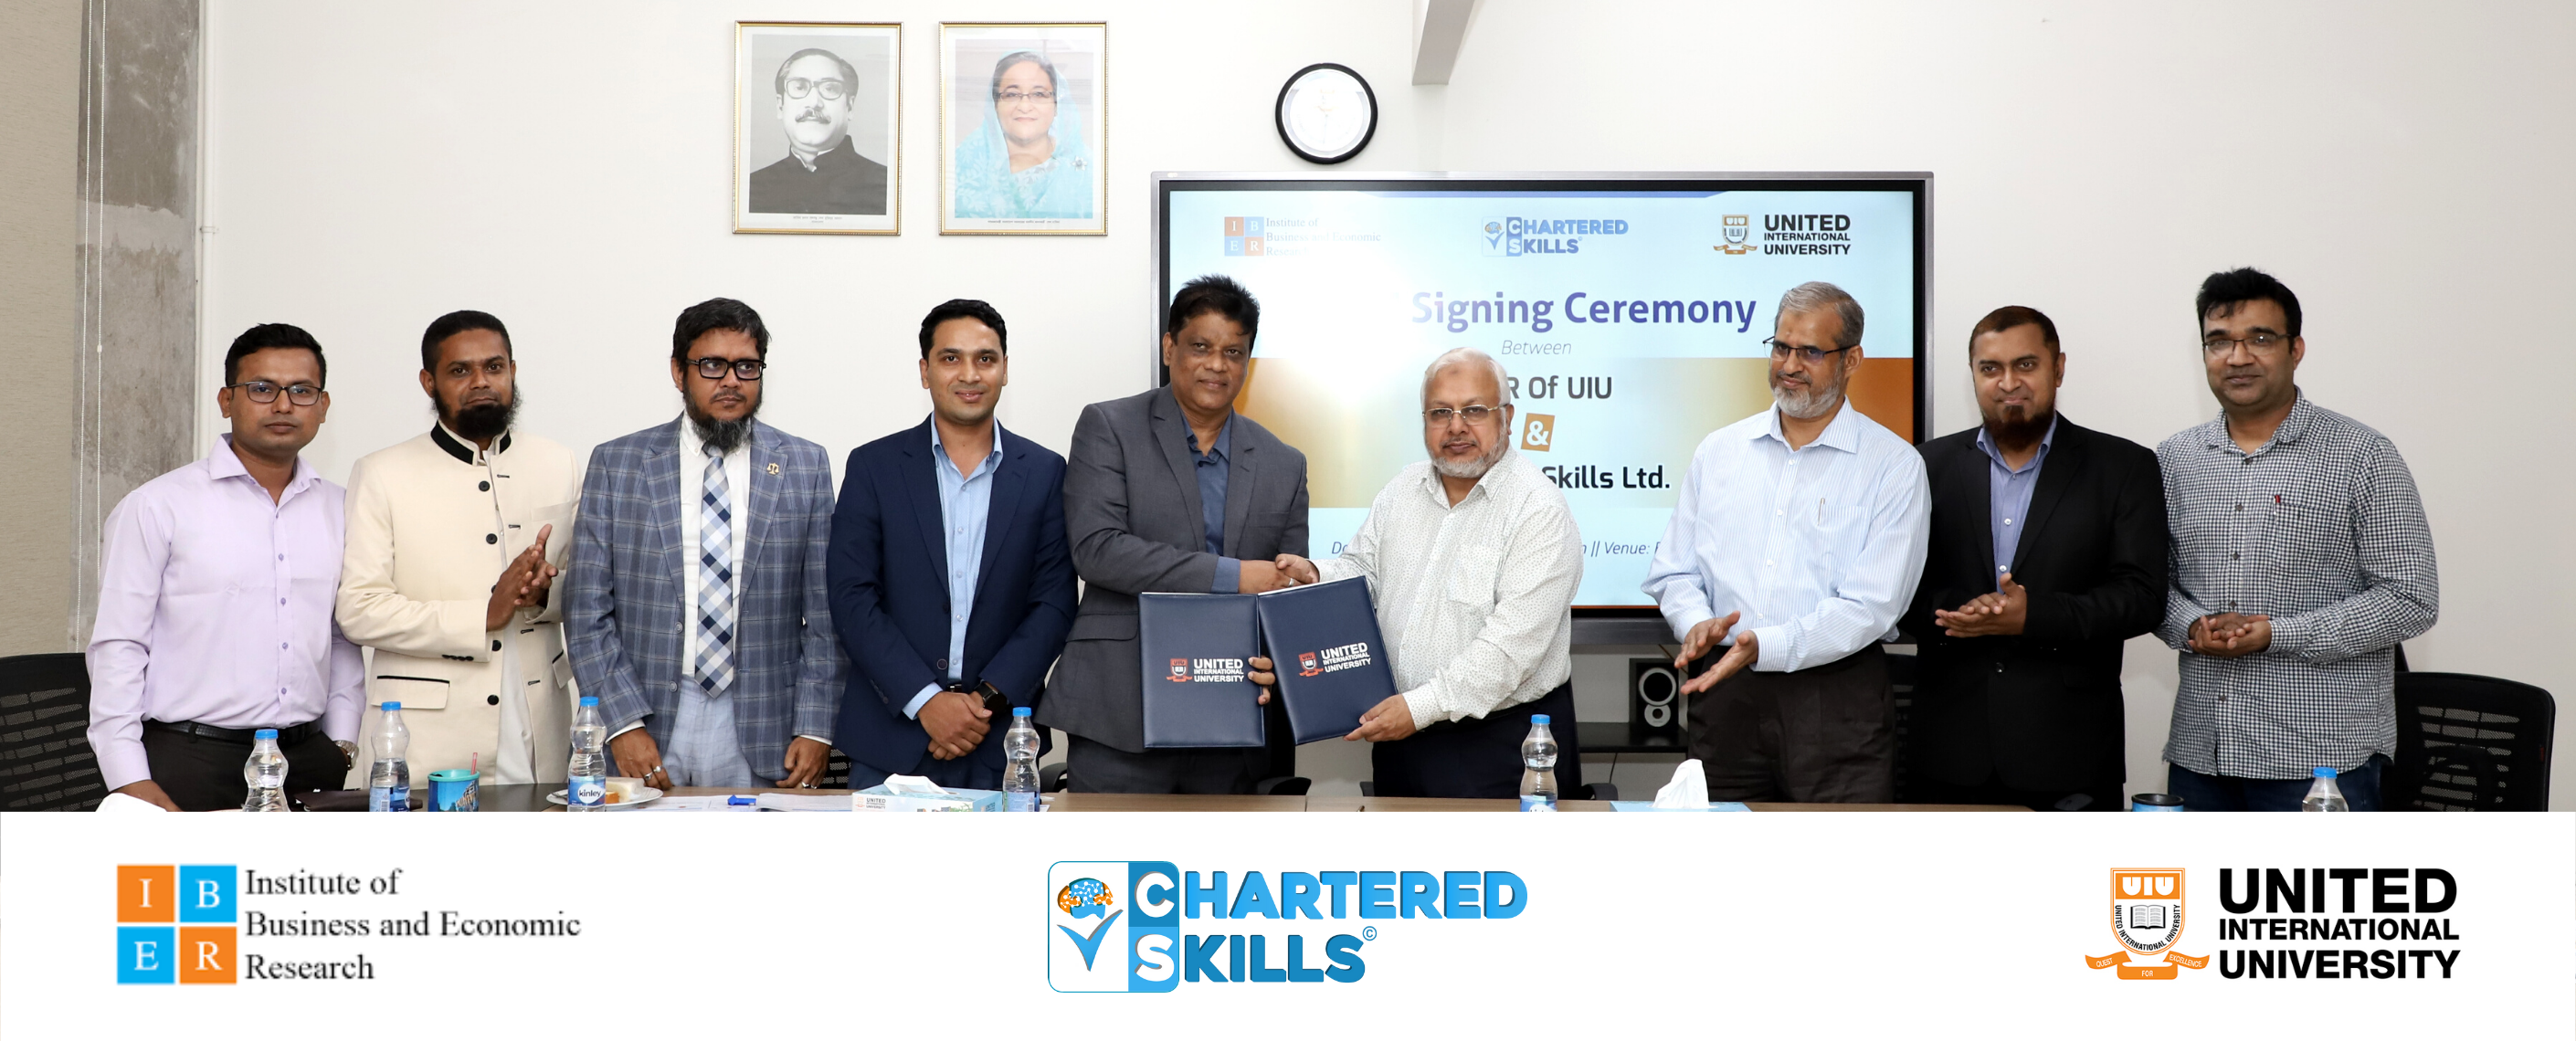 UIU Sign agreement with Chartered Skills